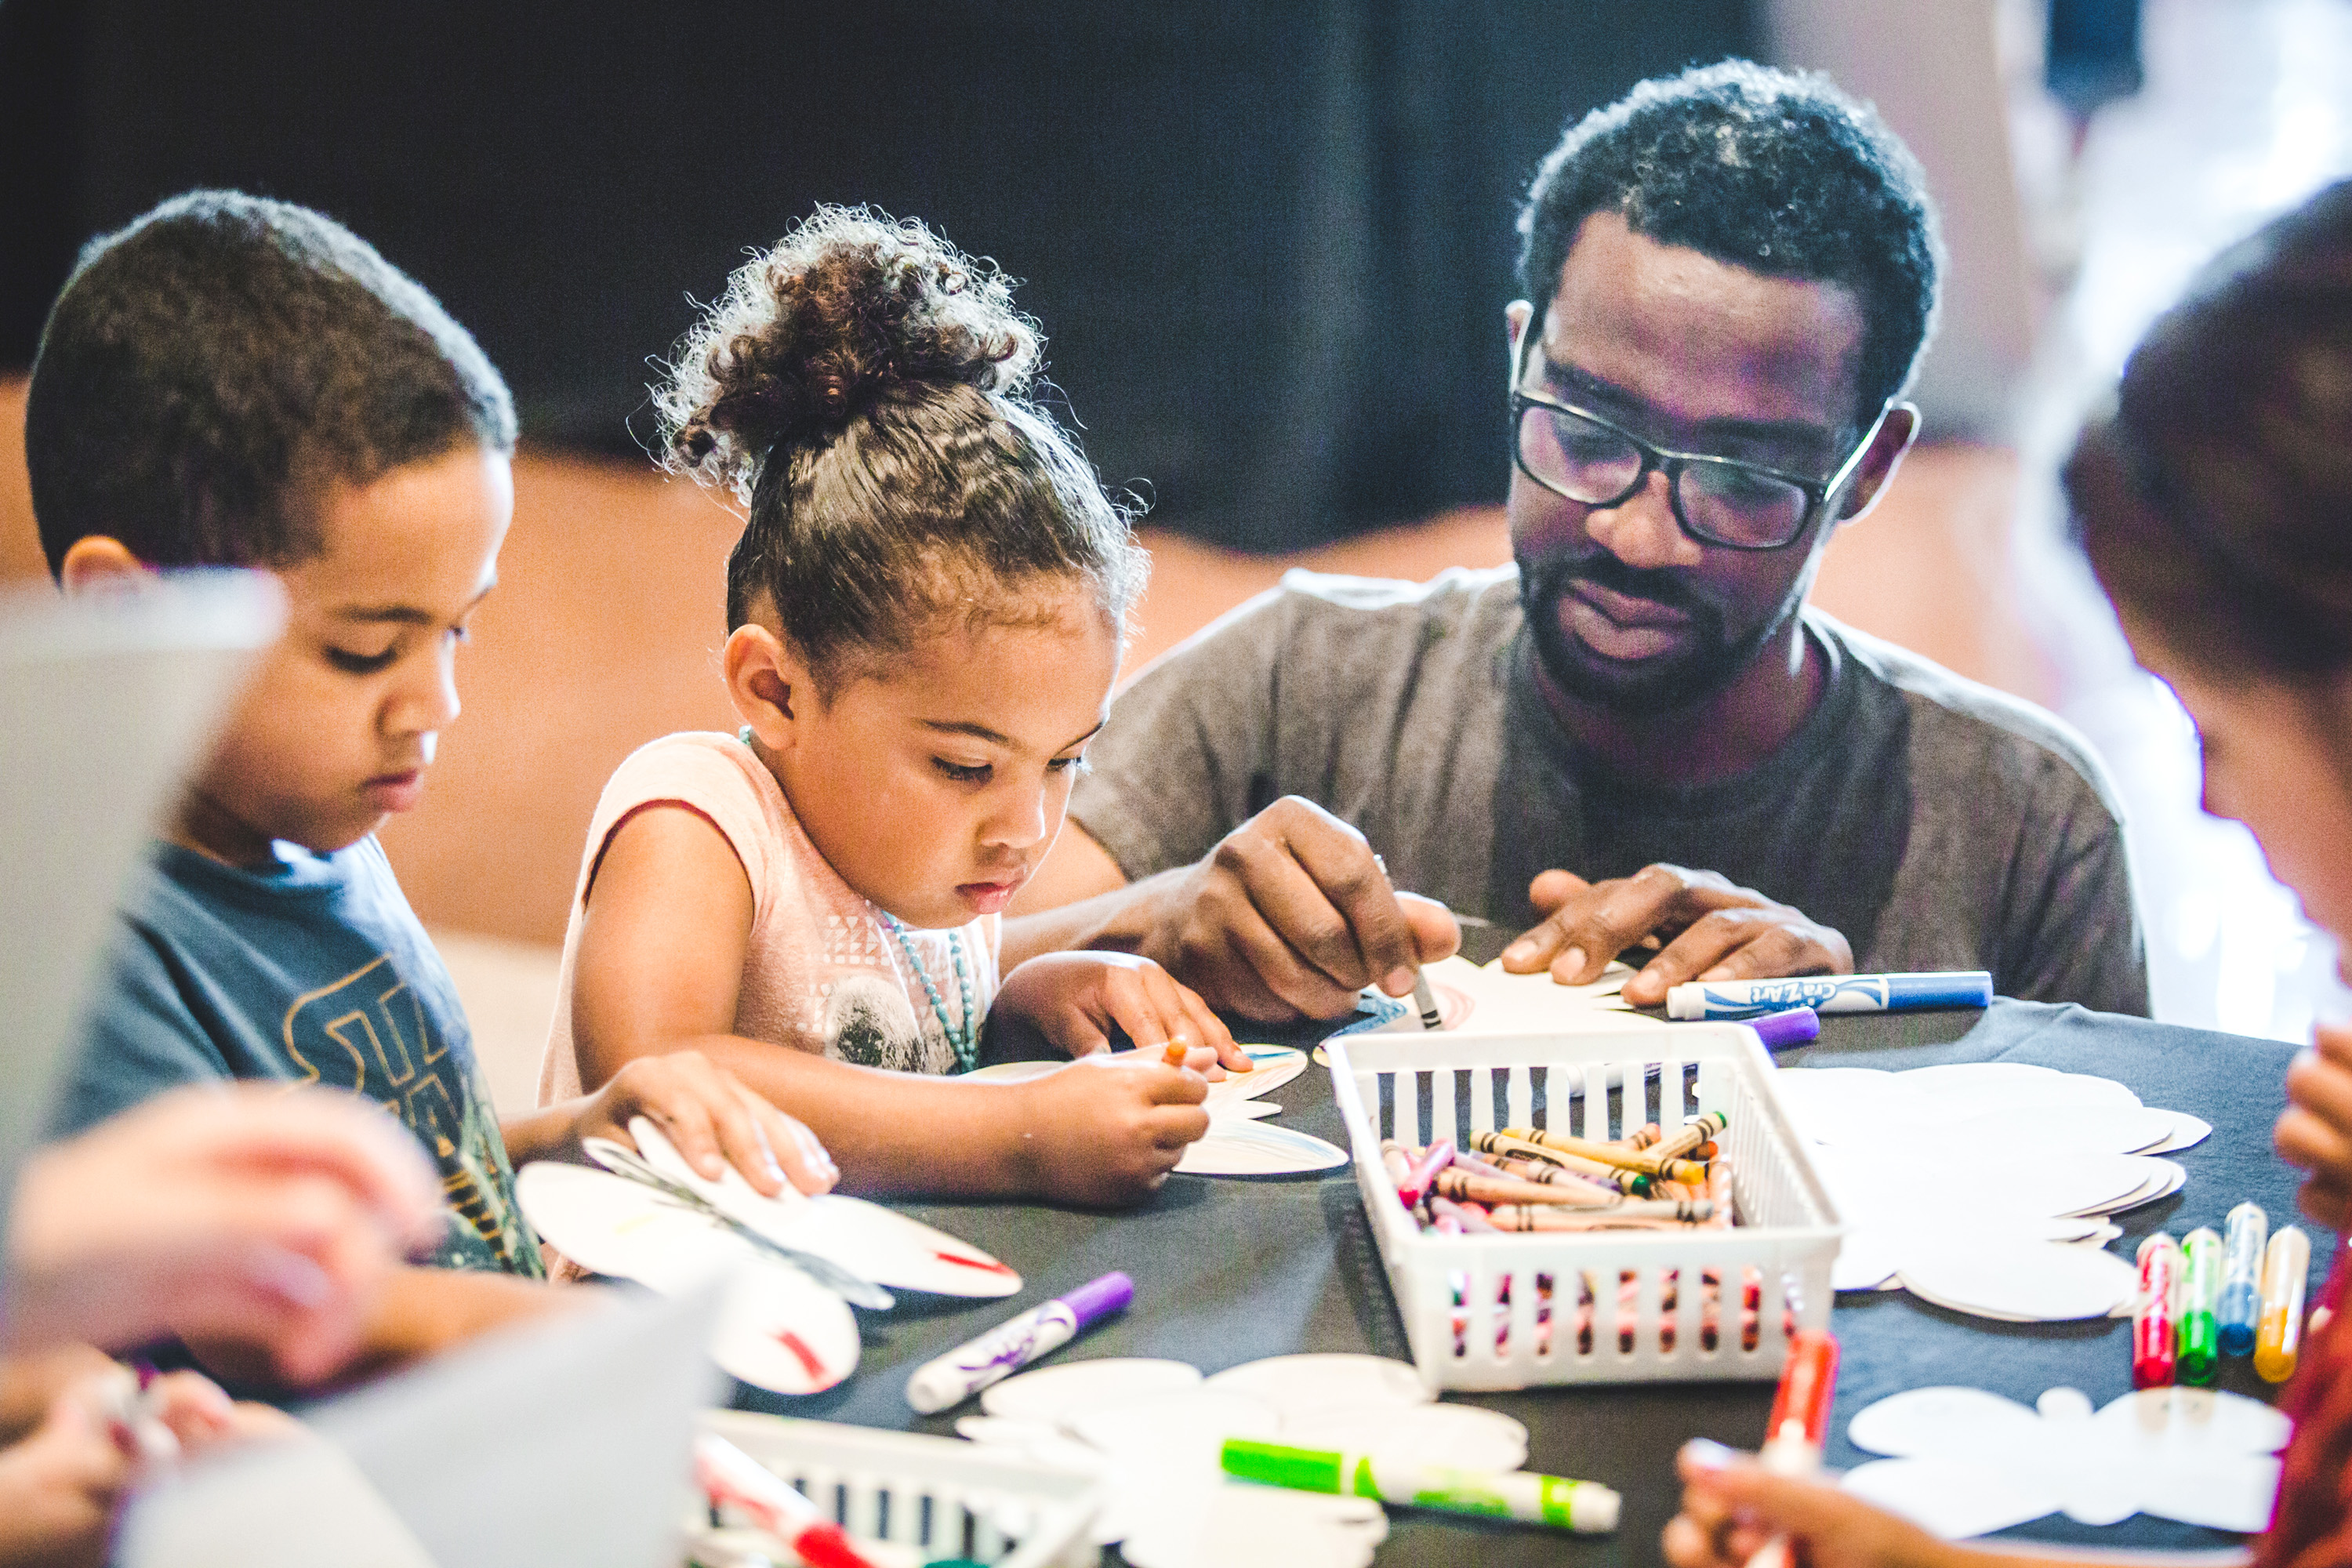 Enjoy a variety of family programs during Spring Break at the Bullock, including hands-on activities, storytimes, and workshops that explore music and storytelling. Drop in anytime between 10am - noon Monday through Friday this week. FREE for members or w